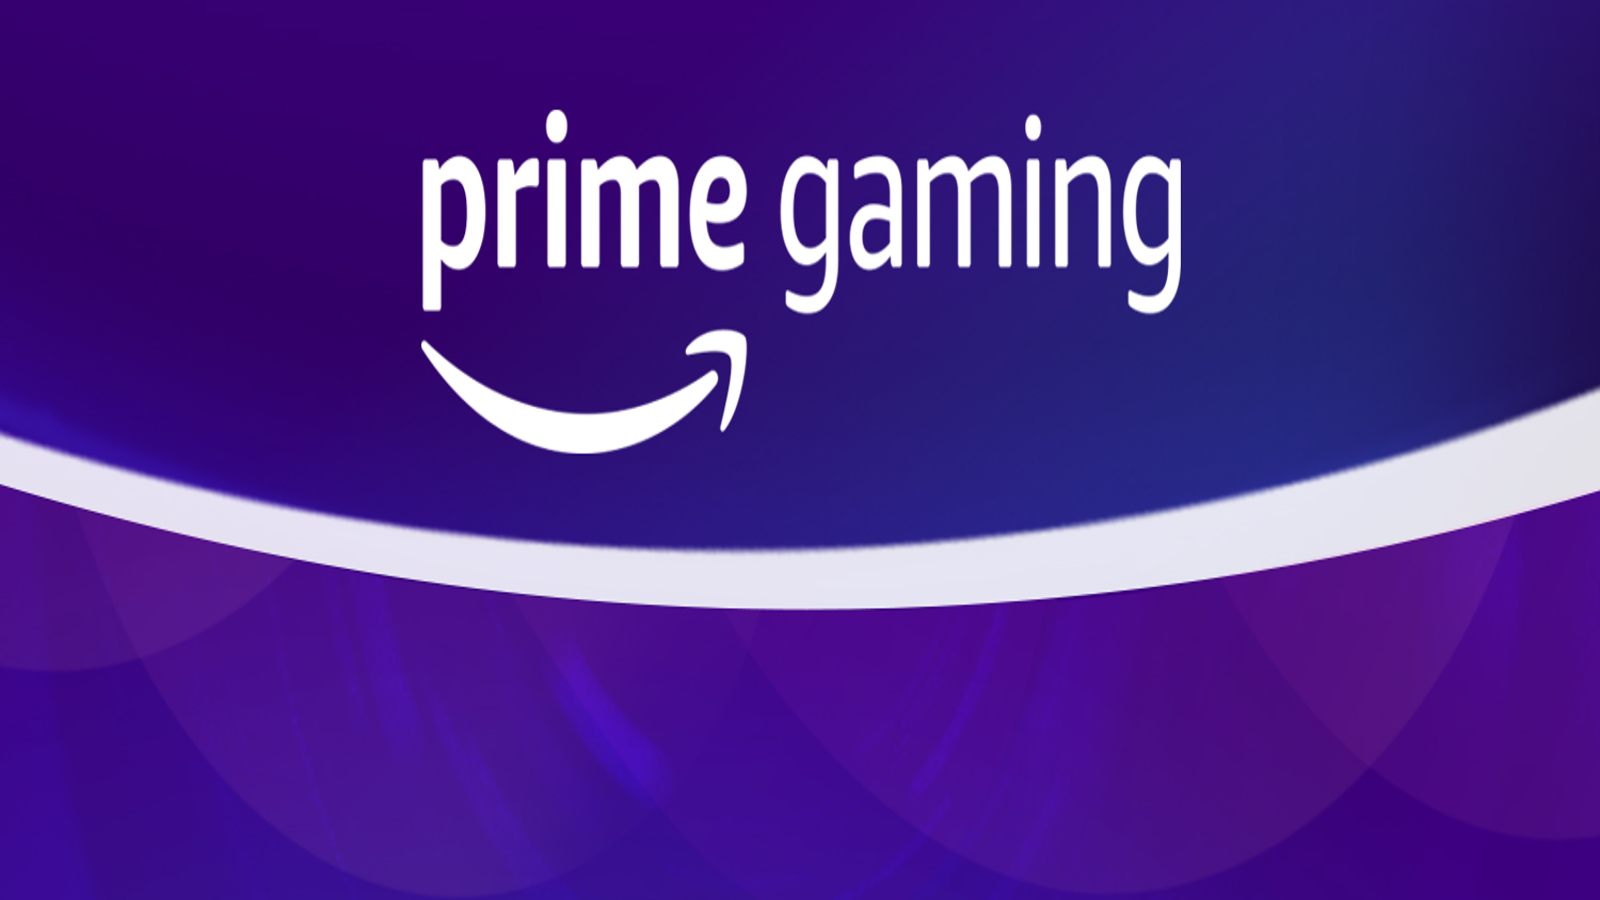 Rebrands Twitch Prime, No Longer Requires Twitch Account To